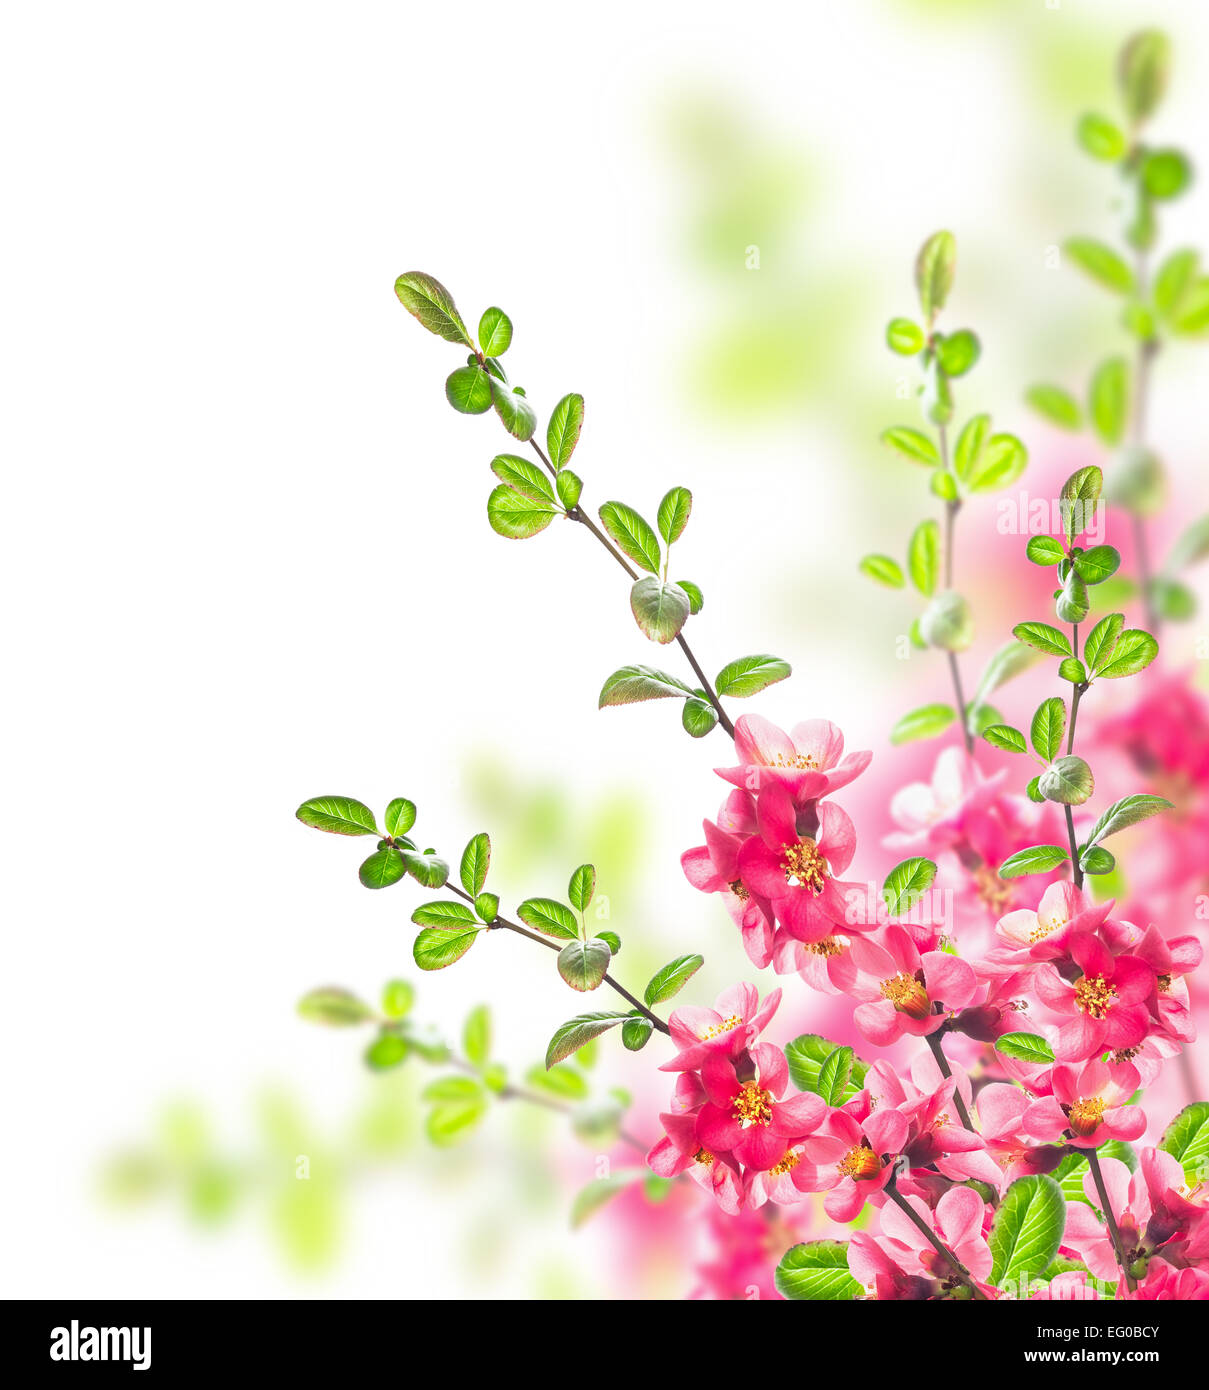 Bush with bright pink flowers, green leaves and young  twigs on white background Stock Photo